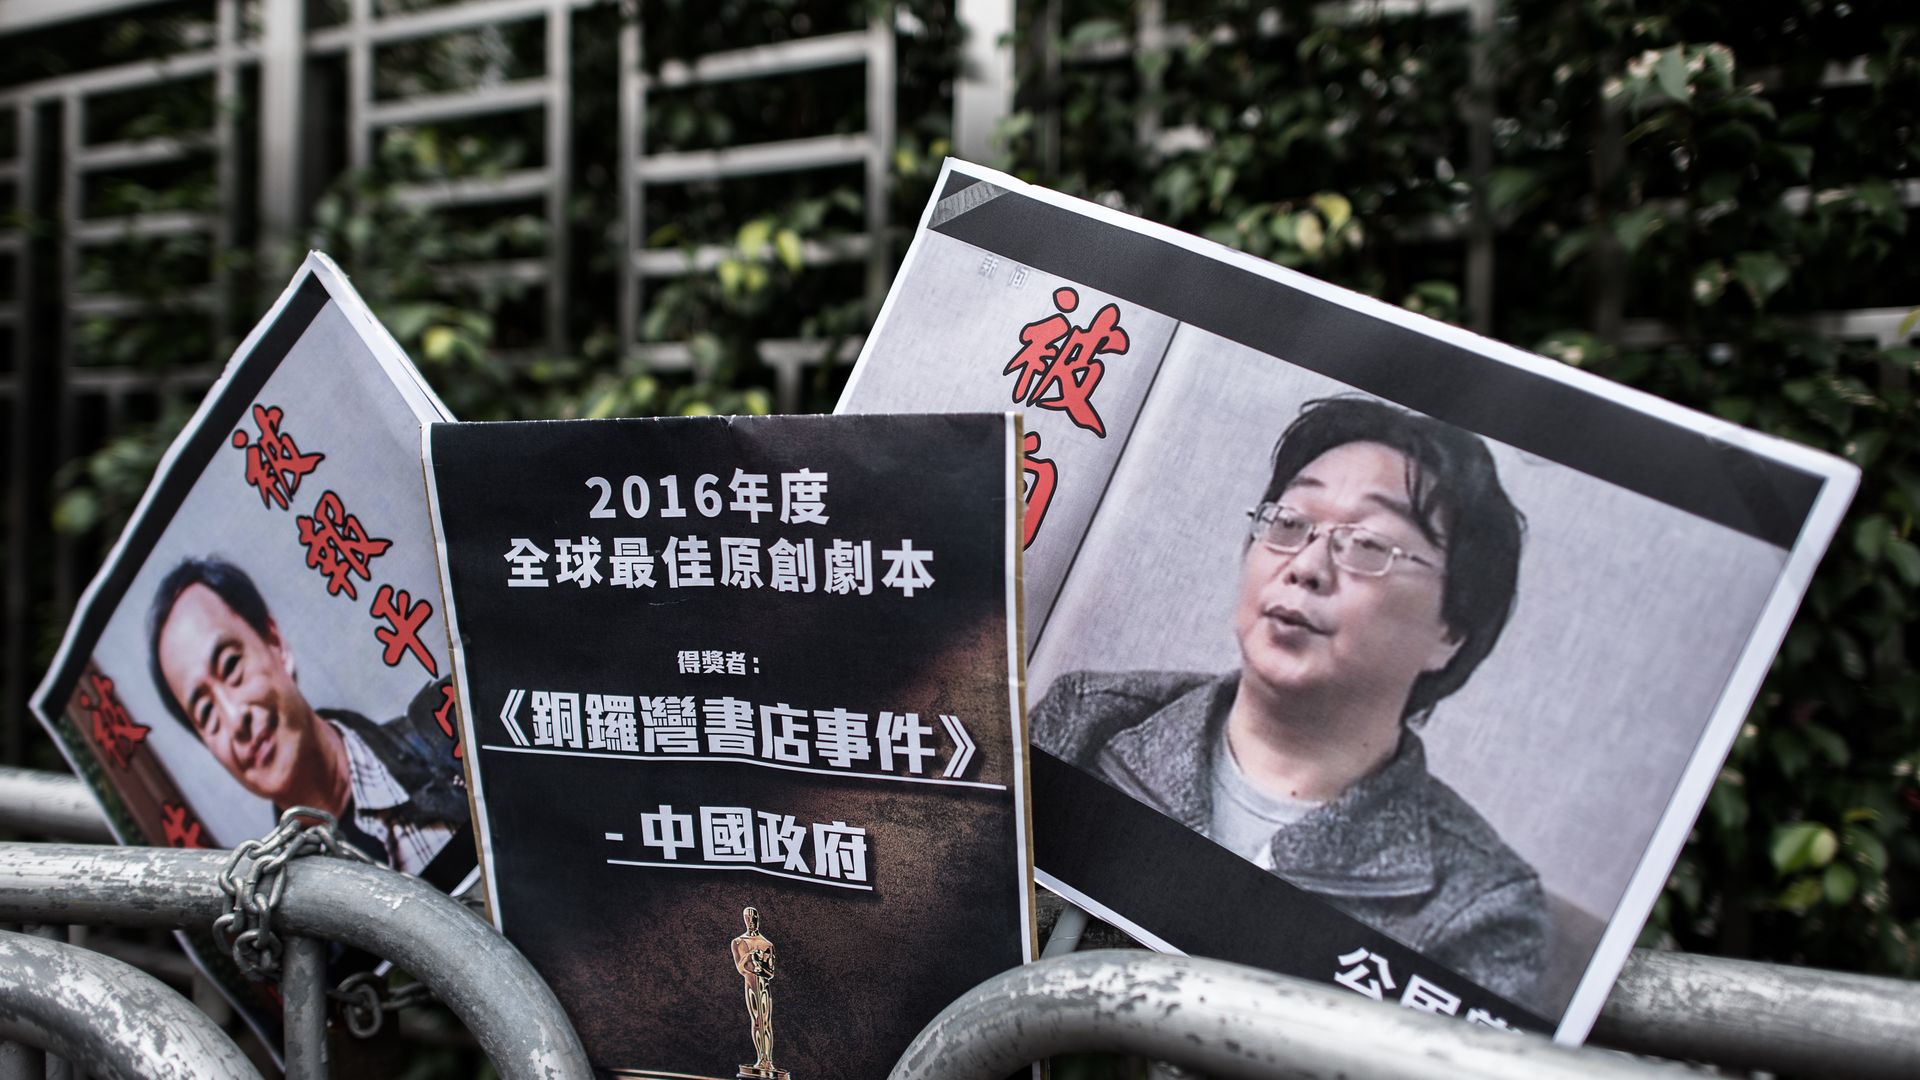 A protester holds up a photo of Gui Minhai